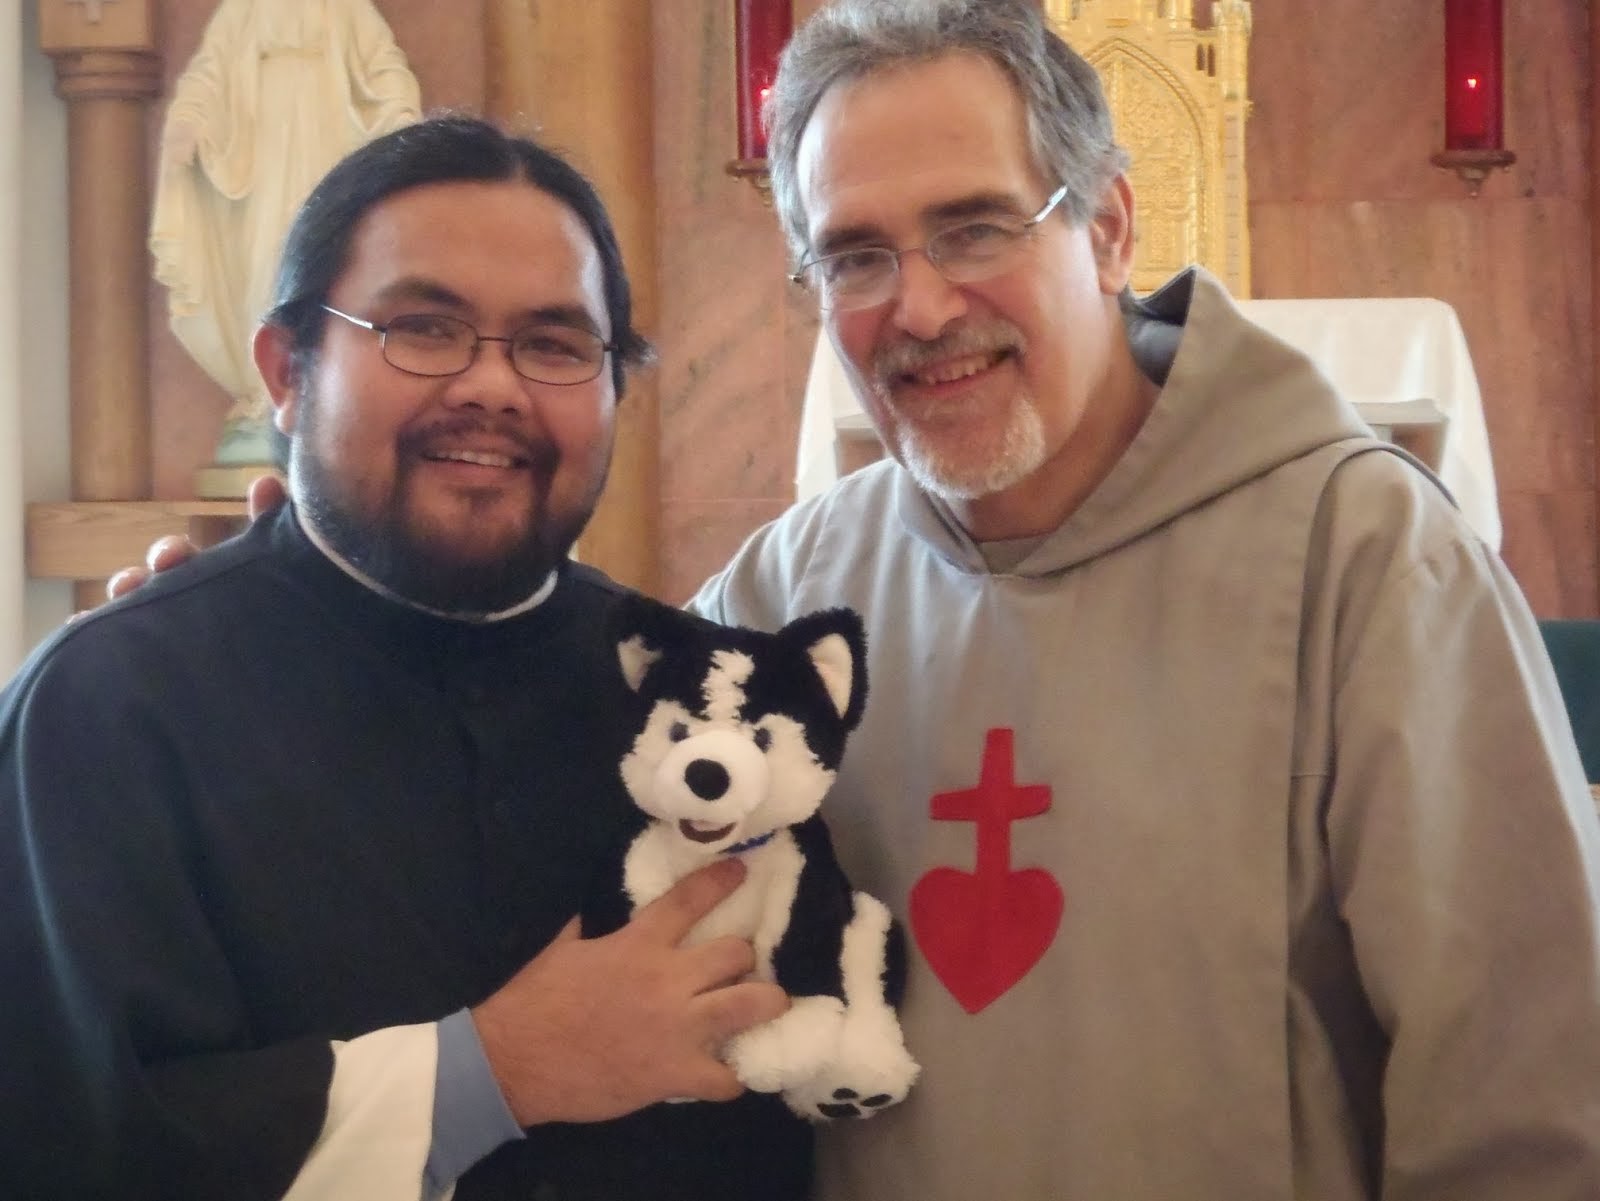 Fr Michael Shields Fr Patrick and the puppy March 4 2014